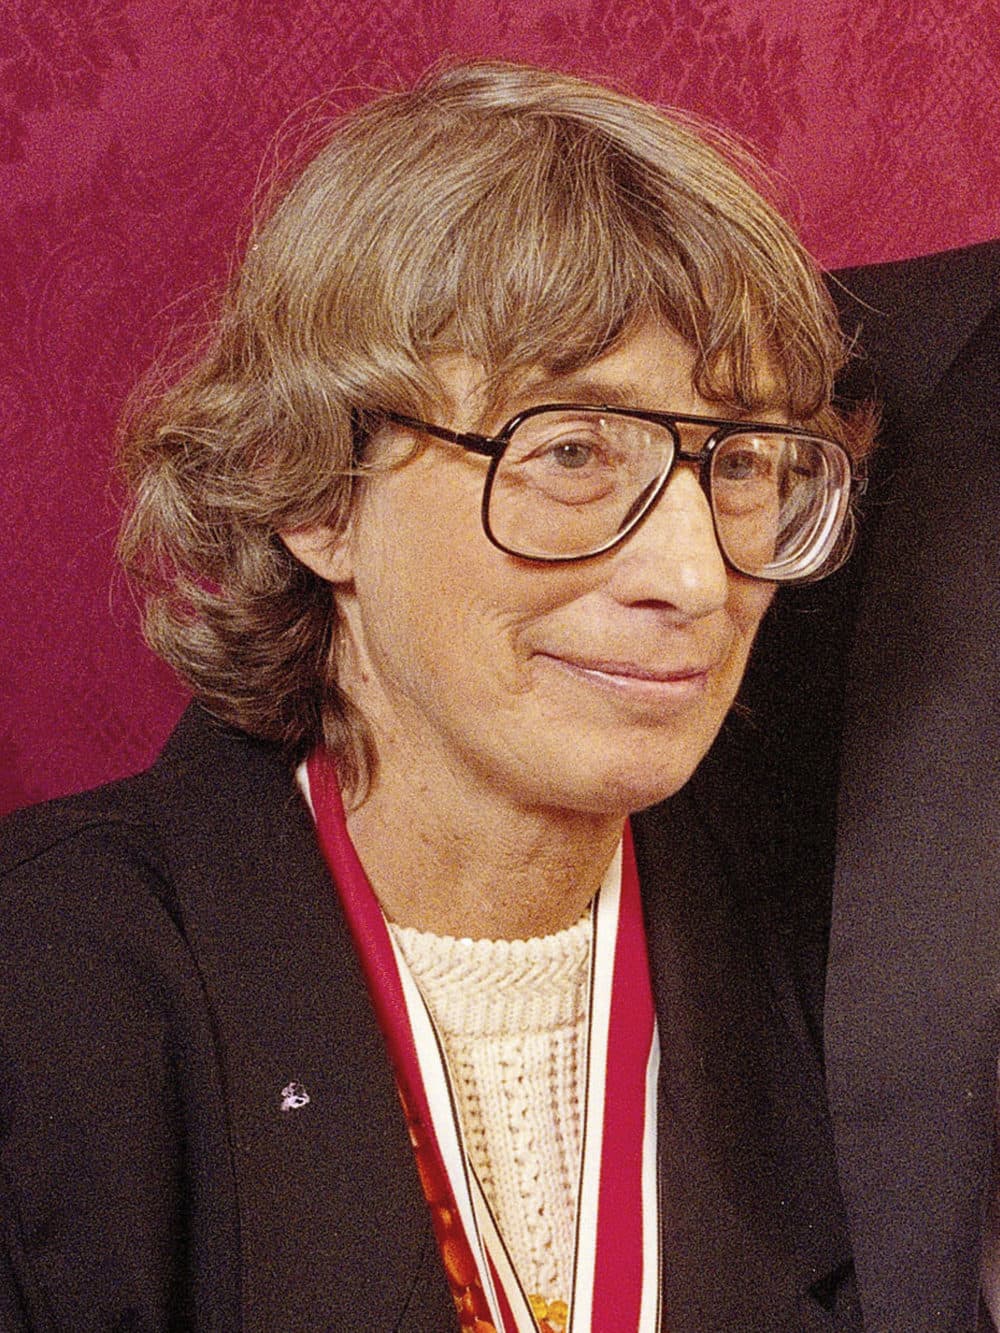 In this Nov. 18, 1992 file photo, Mary Oliver appears at the National Book Awards in New York where she received the poetry award for her book &quot;New and Selected Poems.&quot; Oliver, a Pulitzer Prize-winning poet whose rapturous odes to nature and animal life brought her critical acclaim and popular affection, died Thursday at her home in Hobe Sound, Fla. The case of death was lymphoma. She was 83. (AP Photo/Mark Lennihan, File)